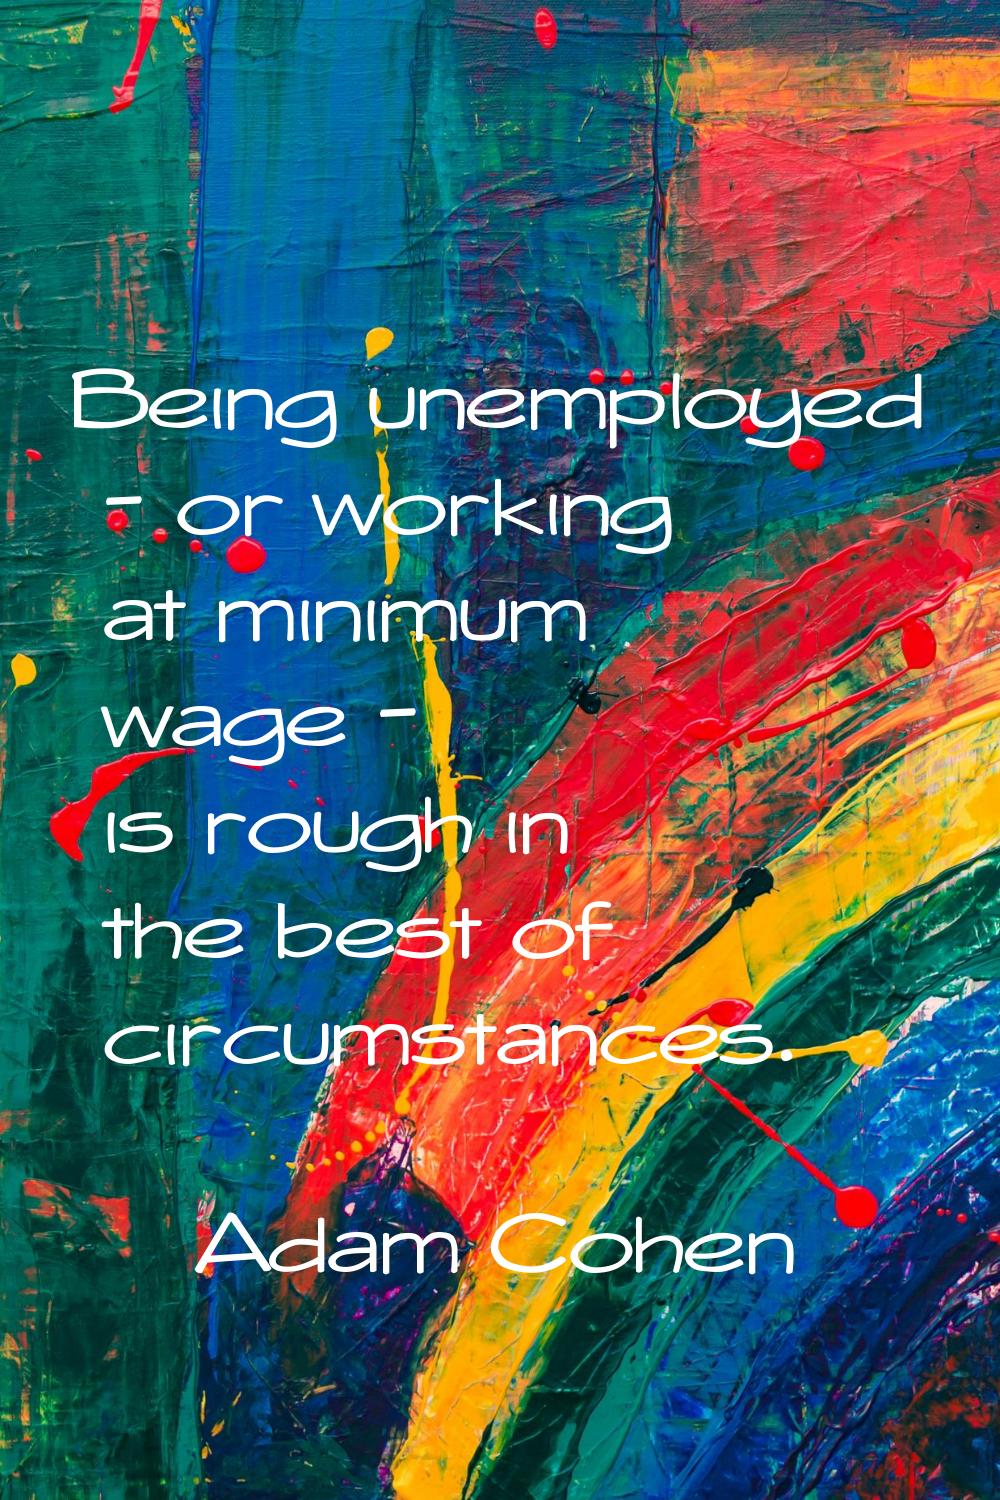 Being unemployed - or working at minimum wage - is rough in the best of circumstances.